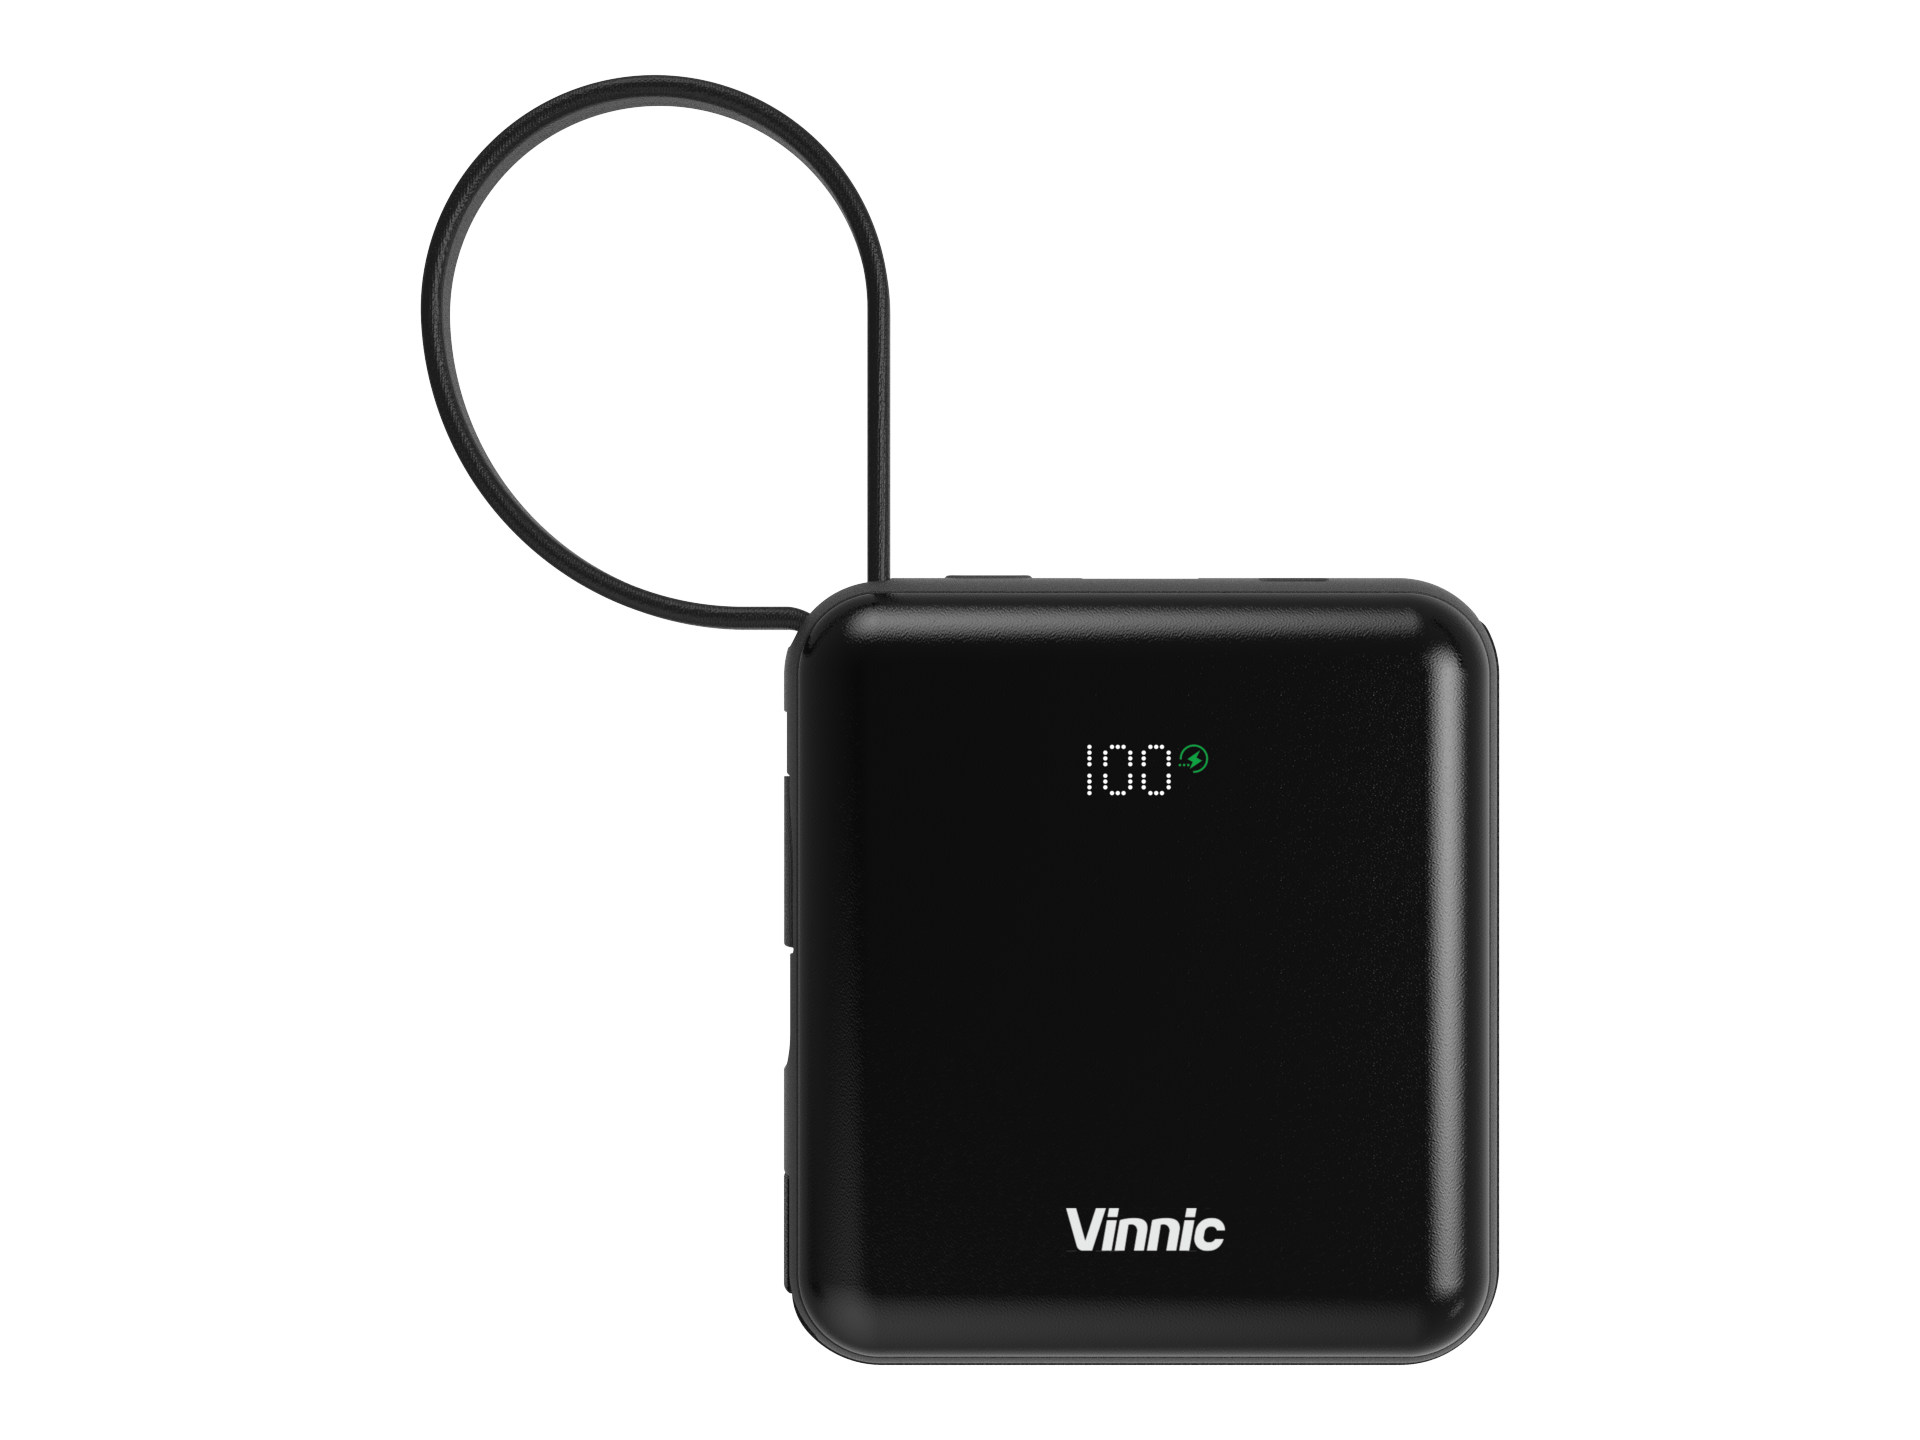 [Combo Deal] Vinnic Fast Charge 10,000mAh Built-in Cables PD QC Powerbank - Graphite & Navy